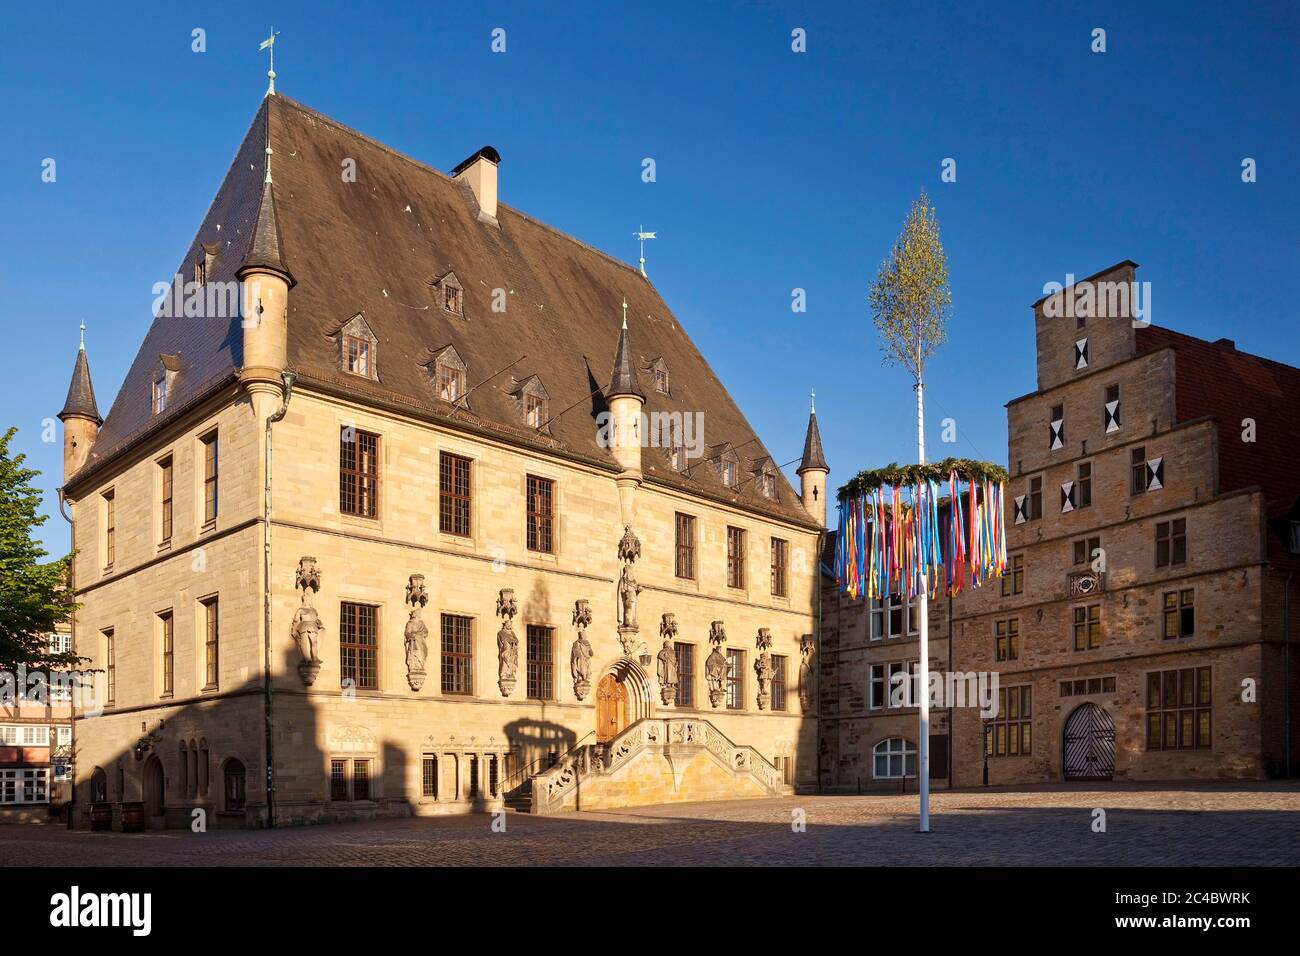 town hall, where the Peace of Westphalia was signed, maypole and weigh house, Germany, Lower Saxony, Osnabrueck Stock Photo